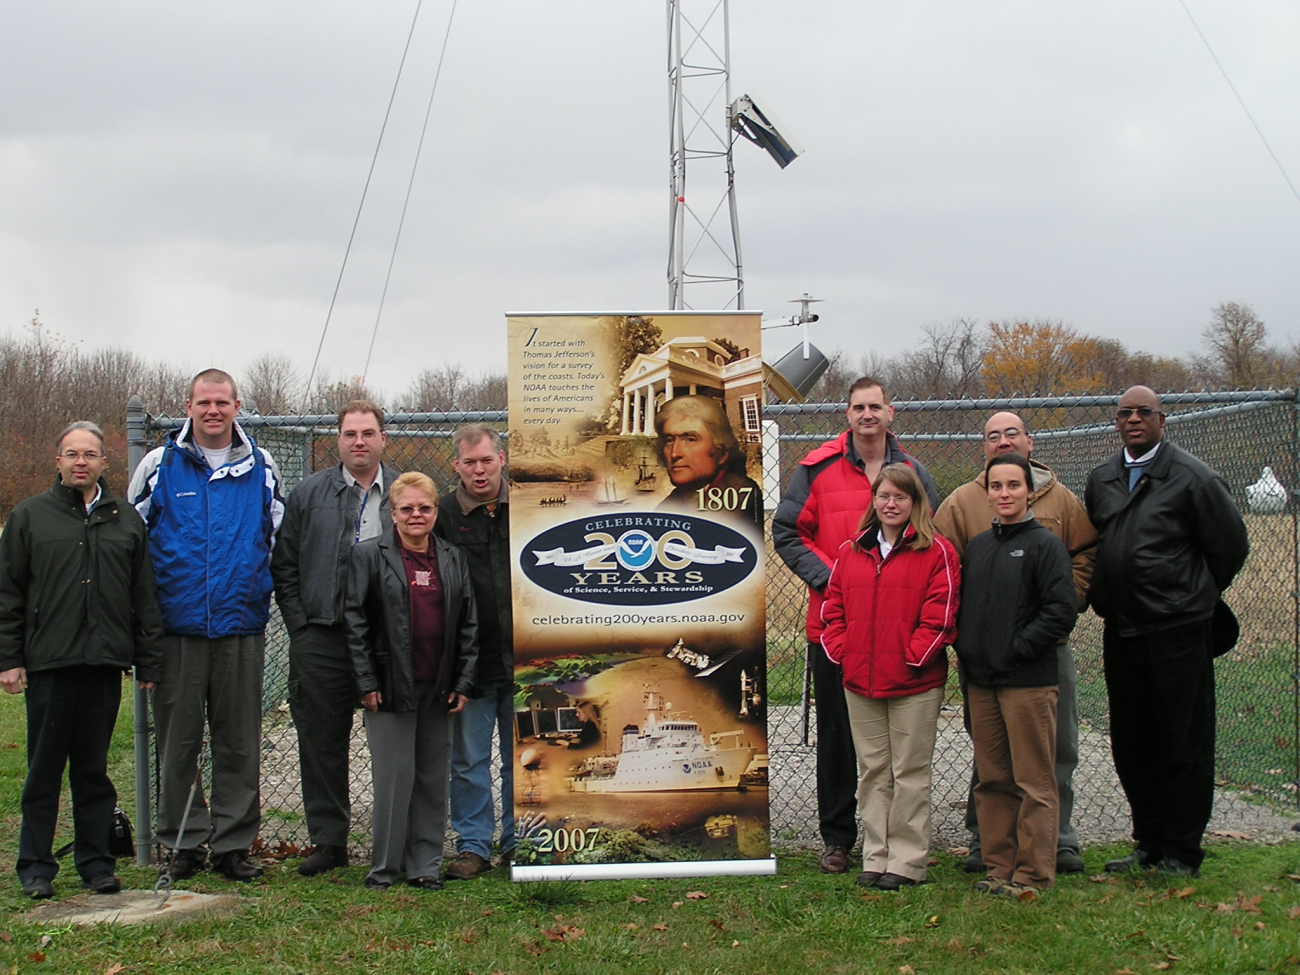 Greetings from Cleveland, Ohio!  NOAA's National Weather Service Office workedclosely with the Old Womans Creek National Estuarine Research Reserve to installinstruments to measure meteorological and hydrological parameters